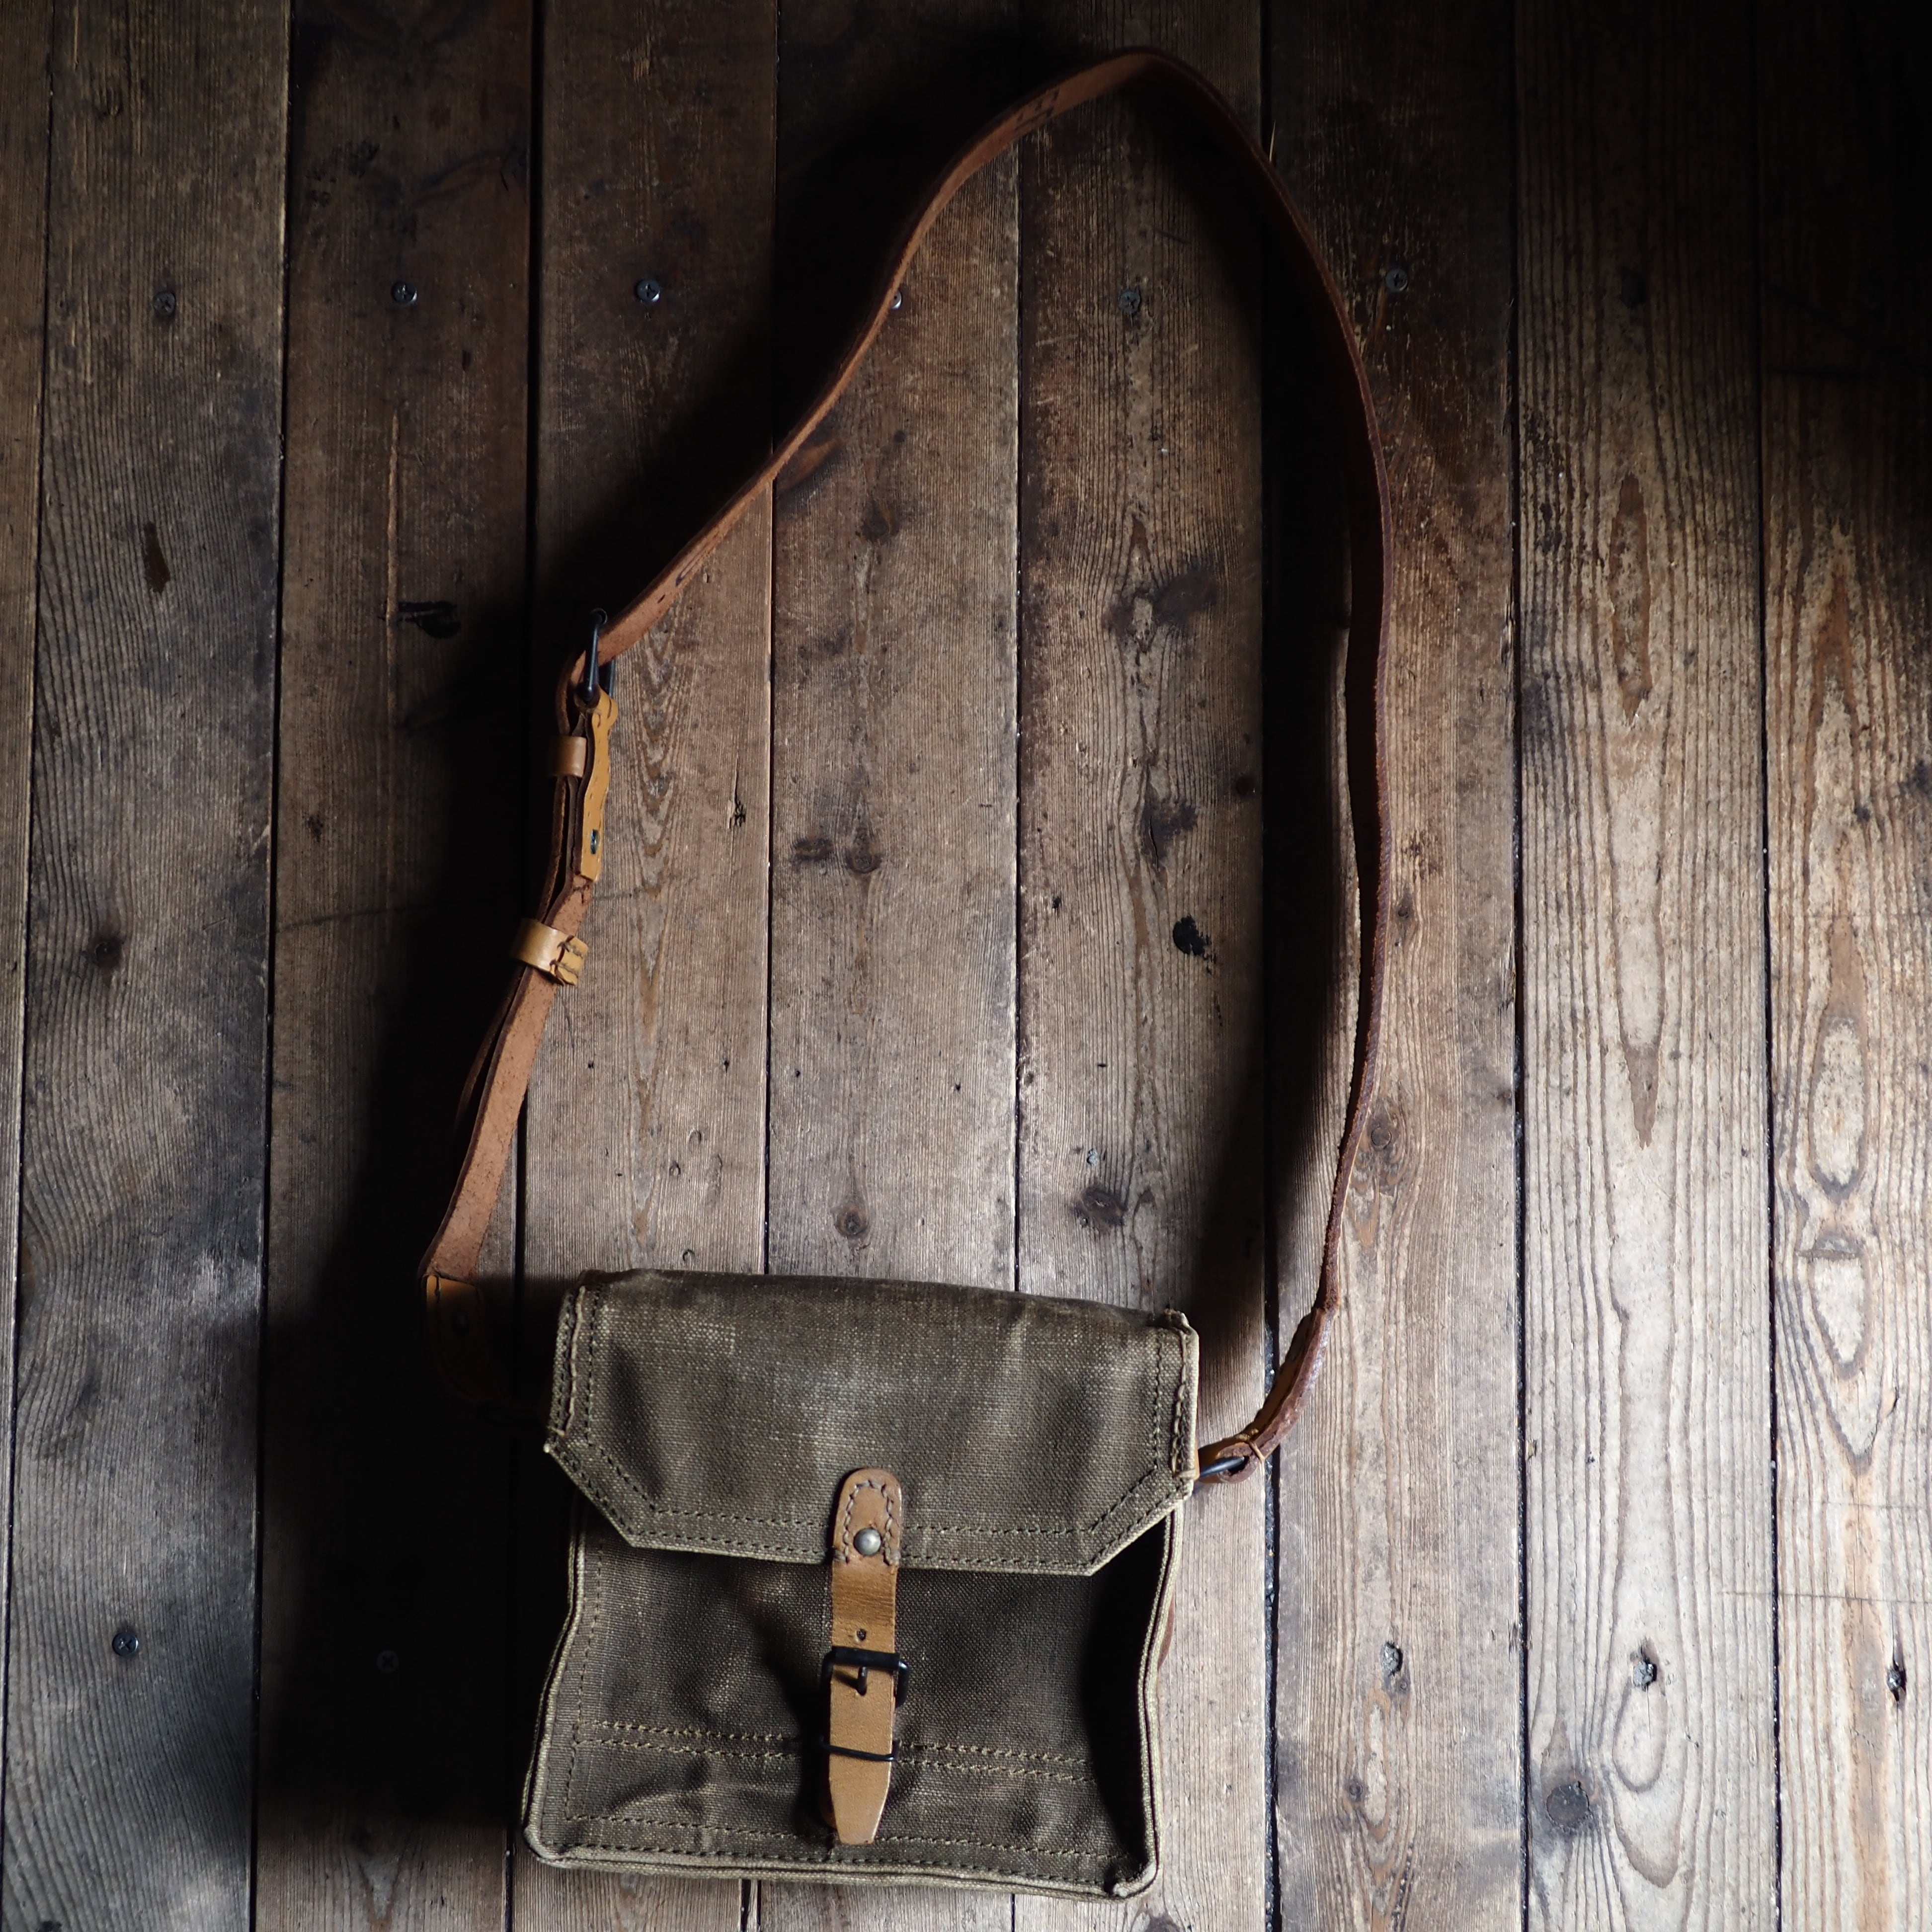 1950's-60's French Army Heavy Canvas × Leather Shoulder Bag